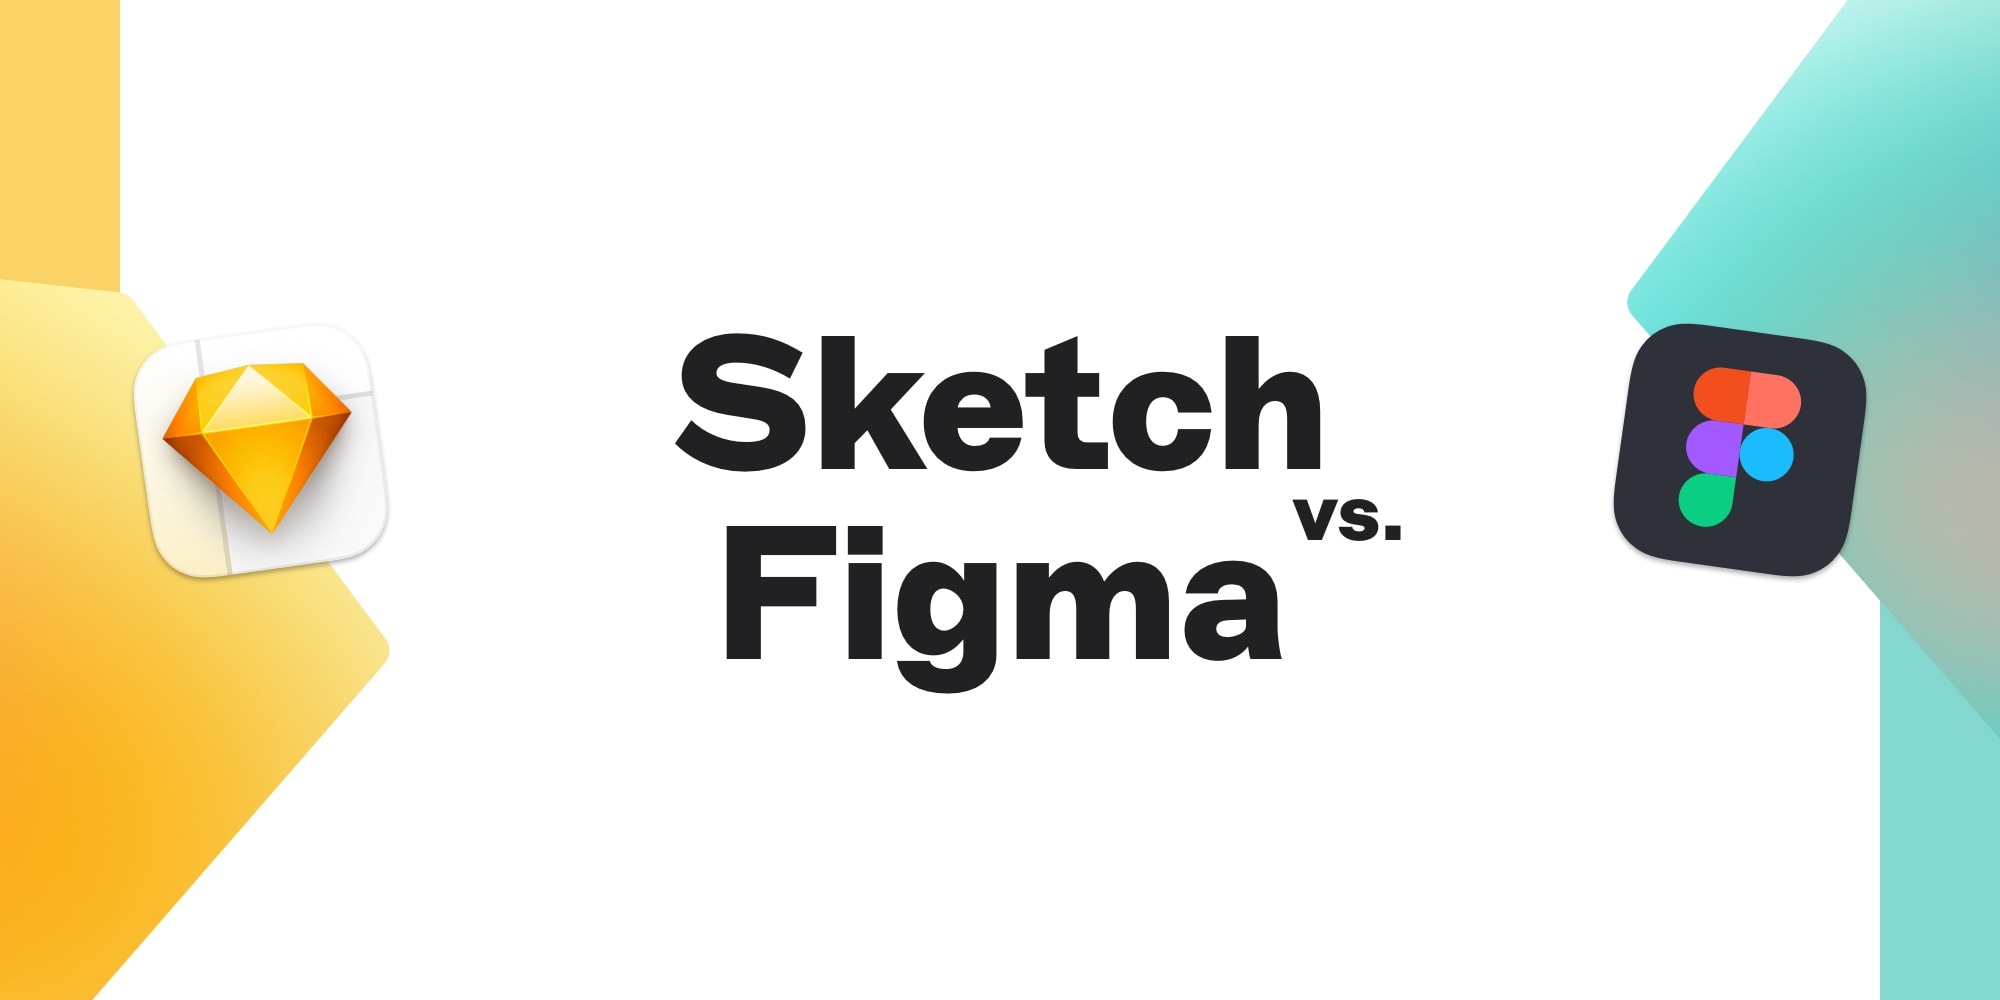 Sketch and Figma